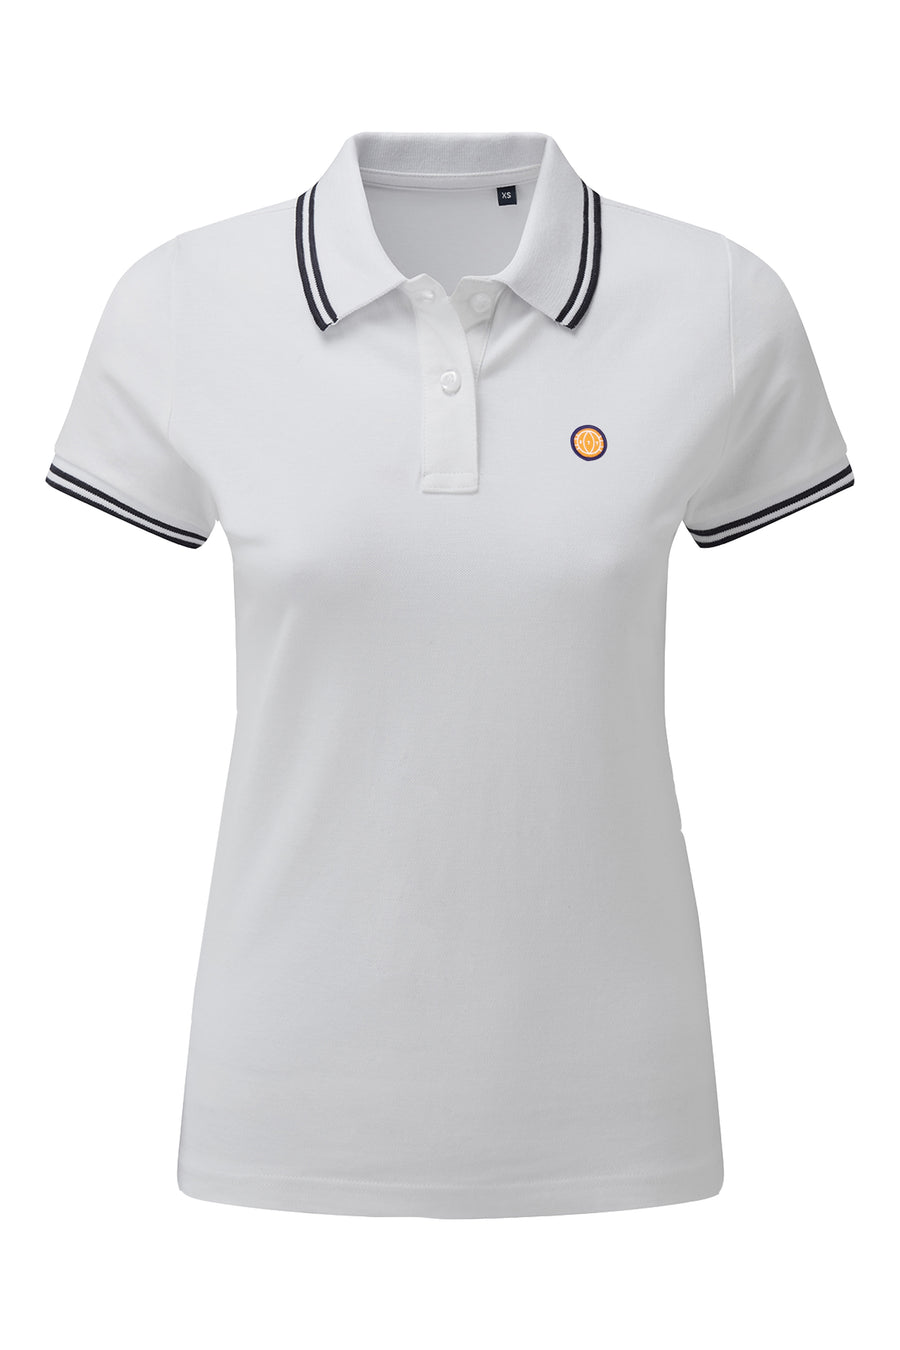 Women's White and Navy Tipped FTT Polo